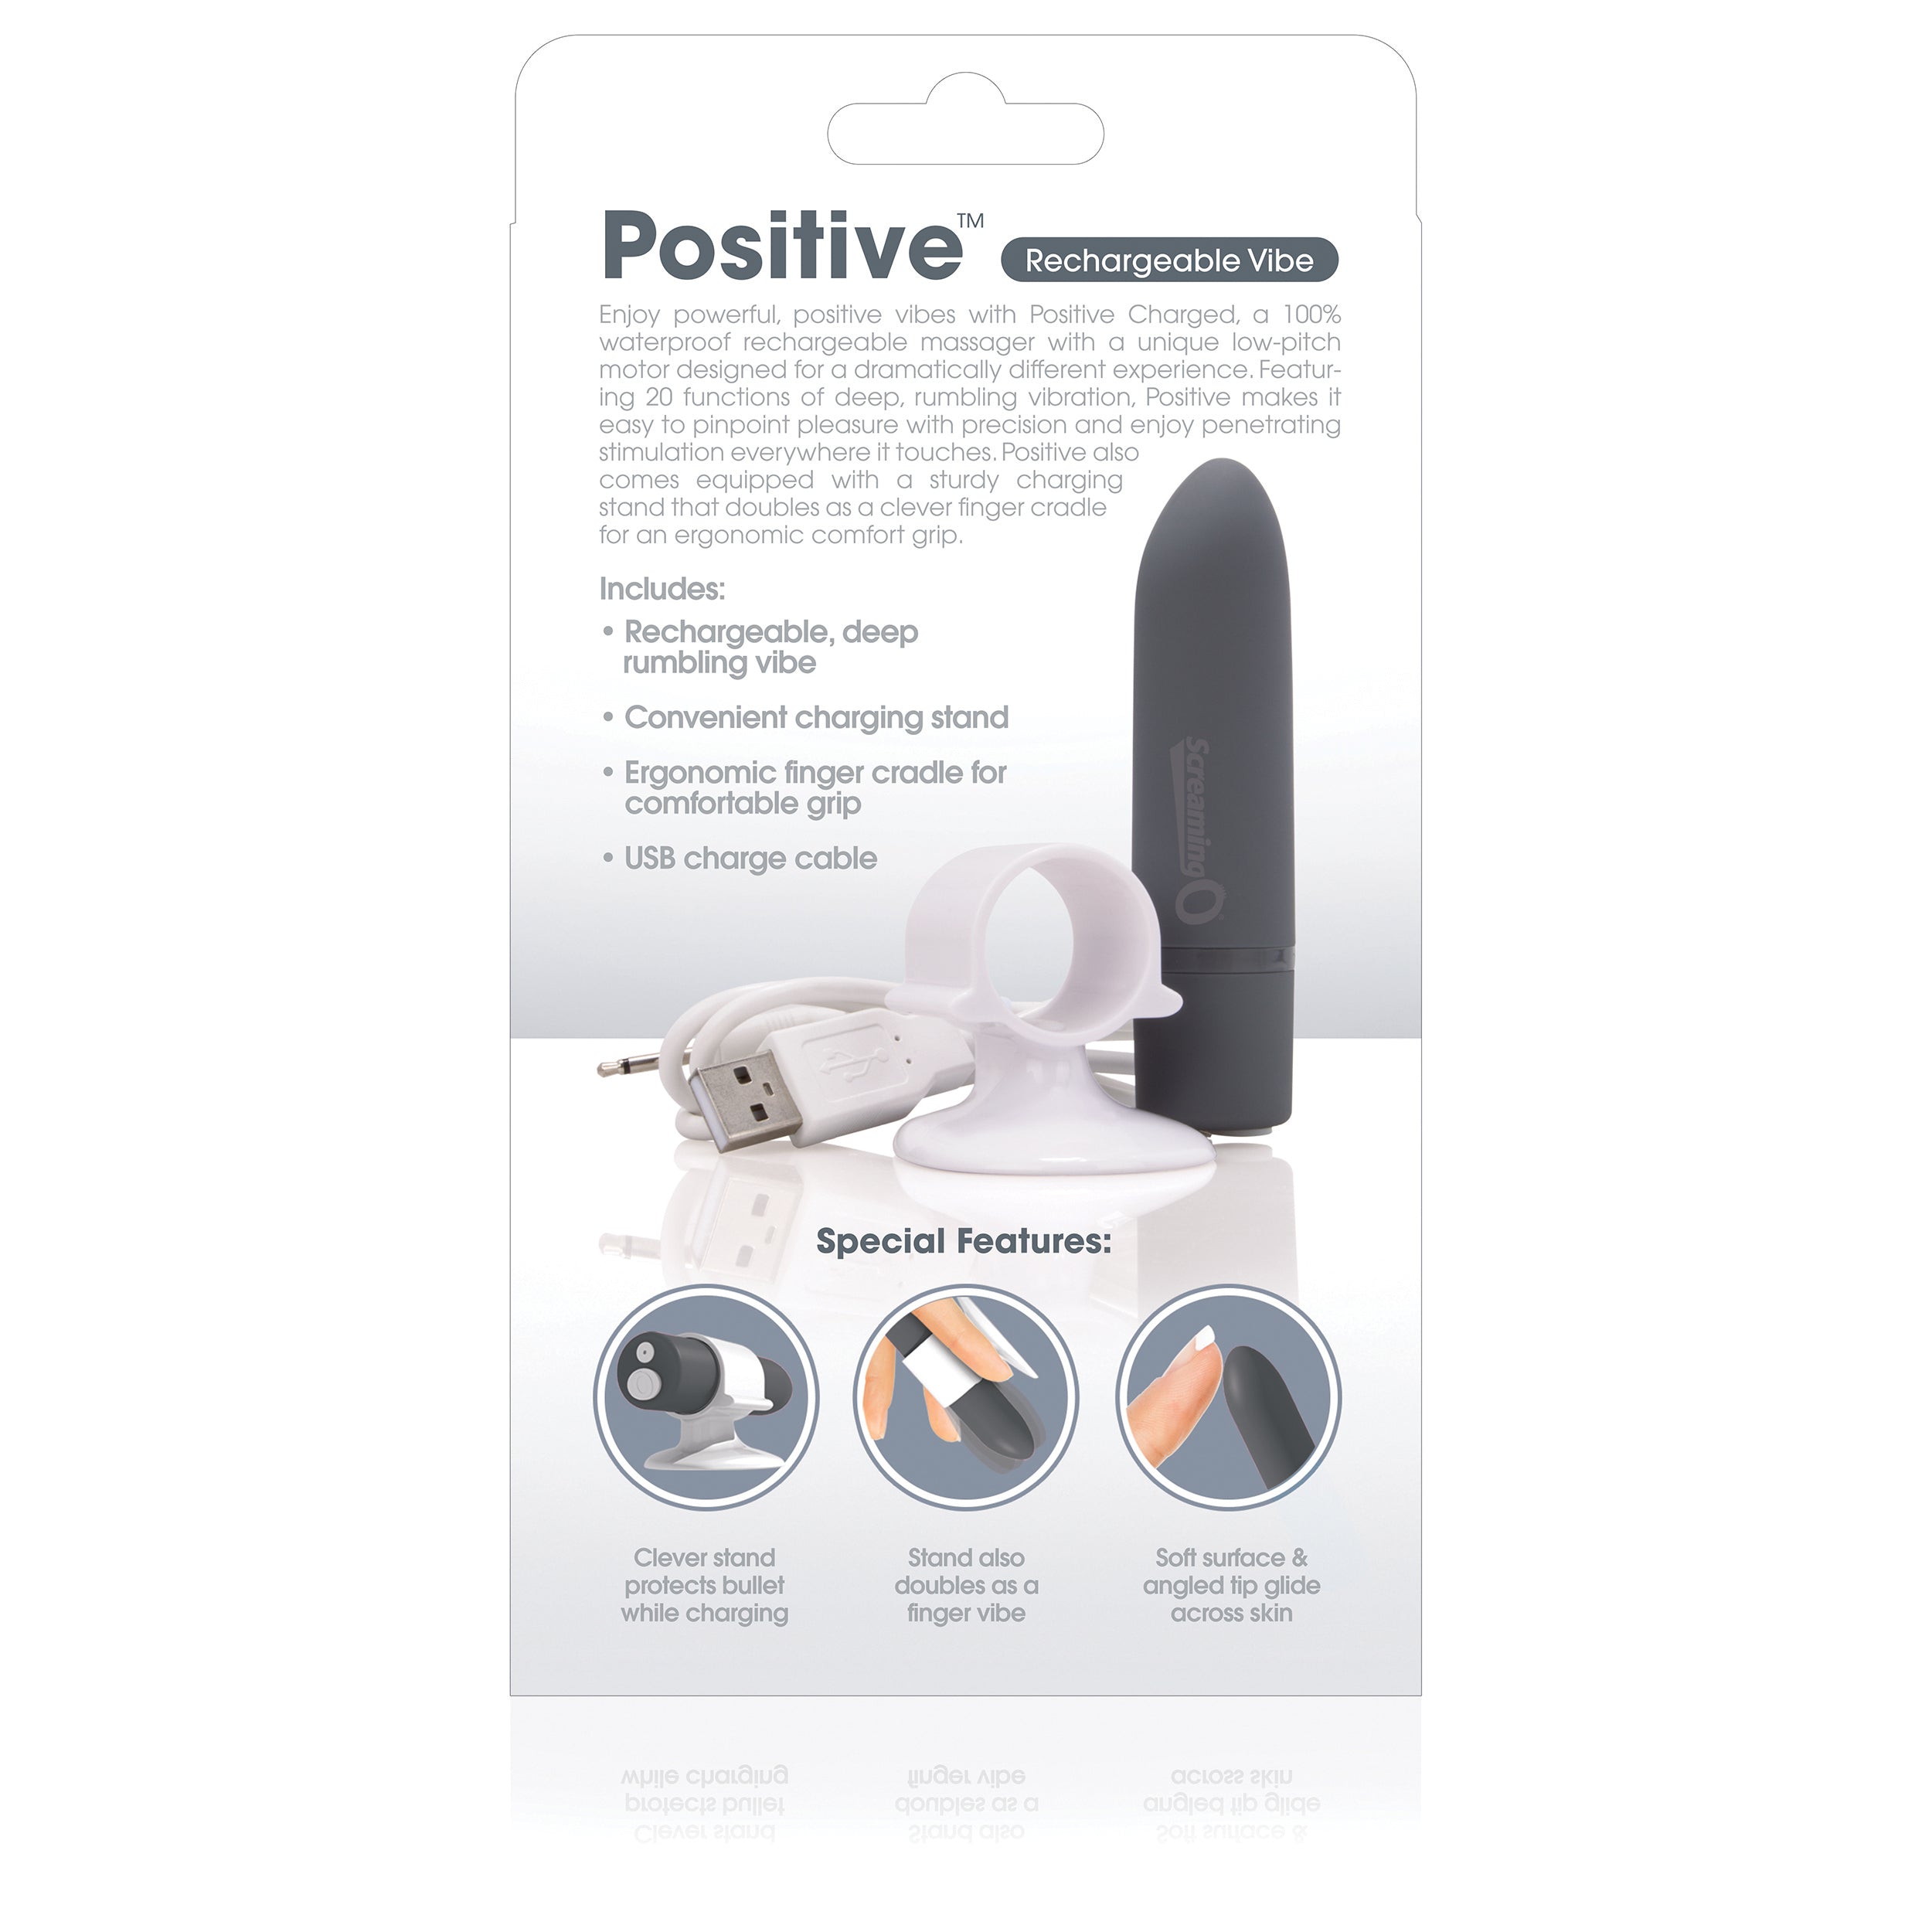 Charged Positive Rechargeable Vibe - Grey-5